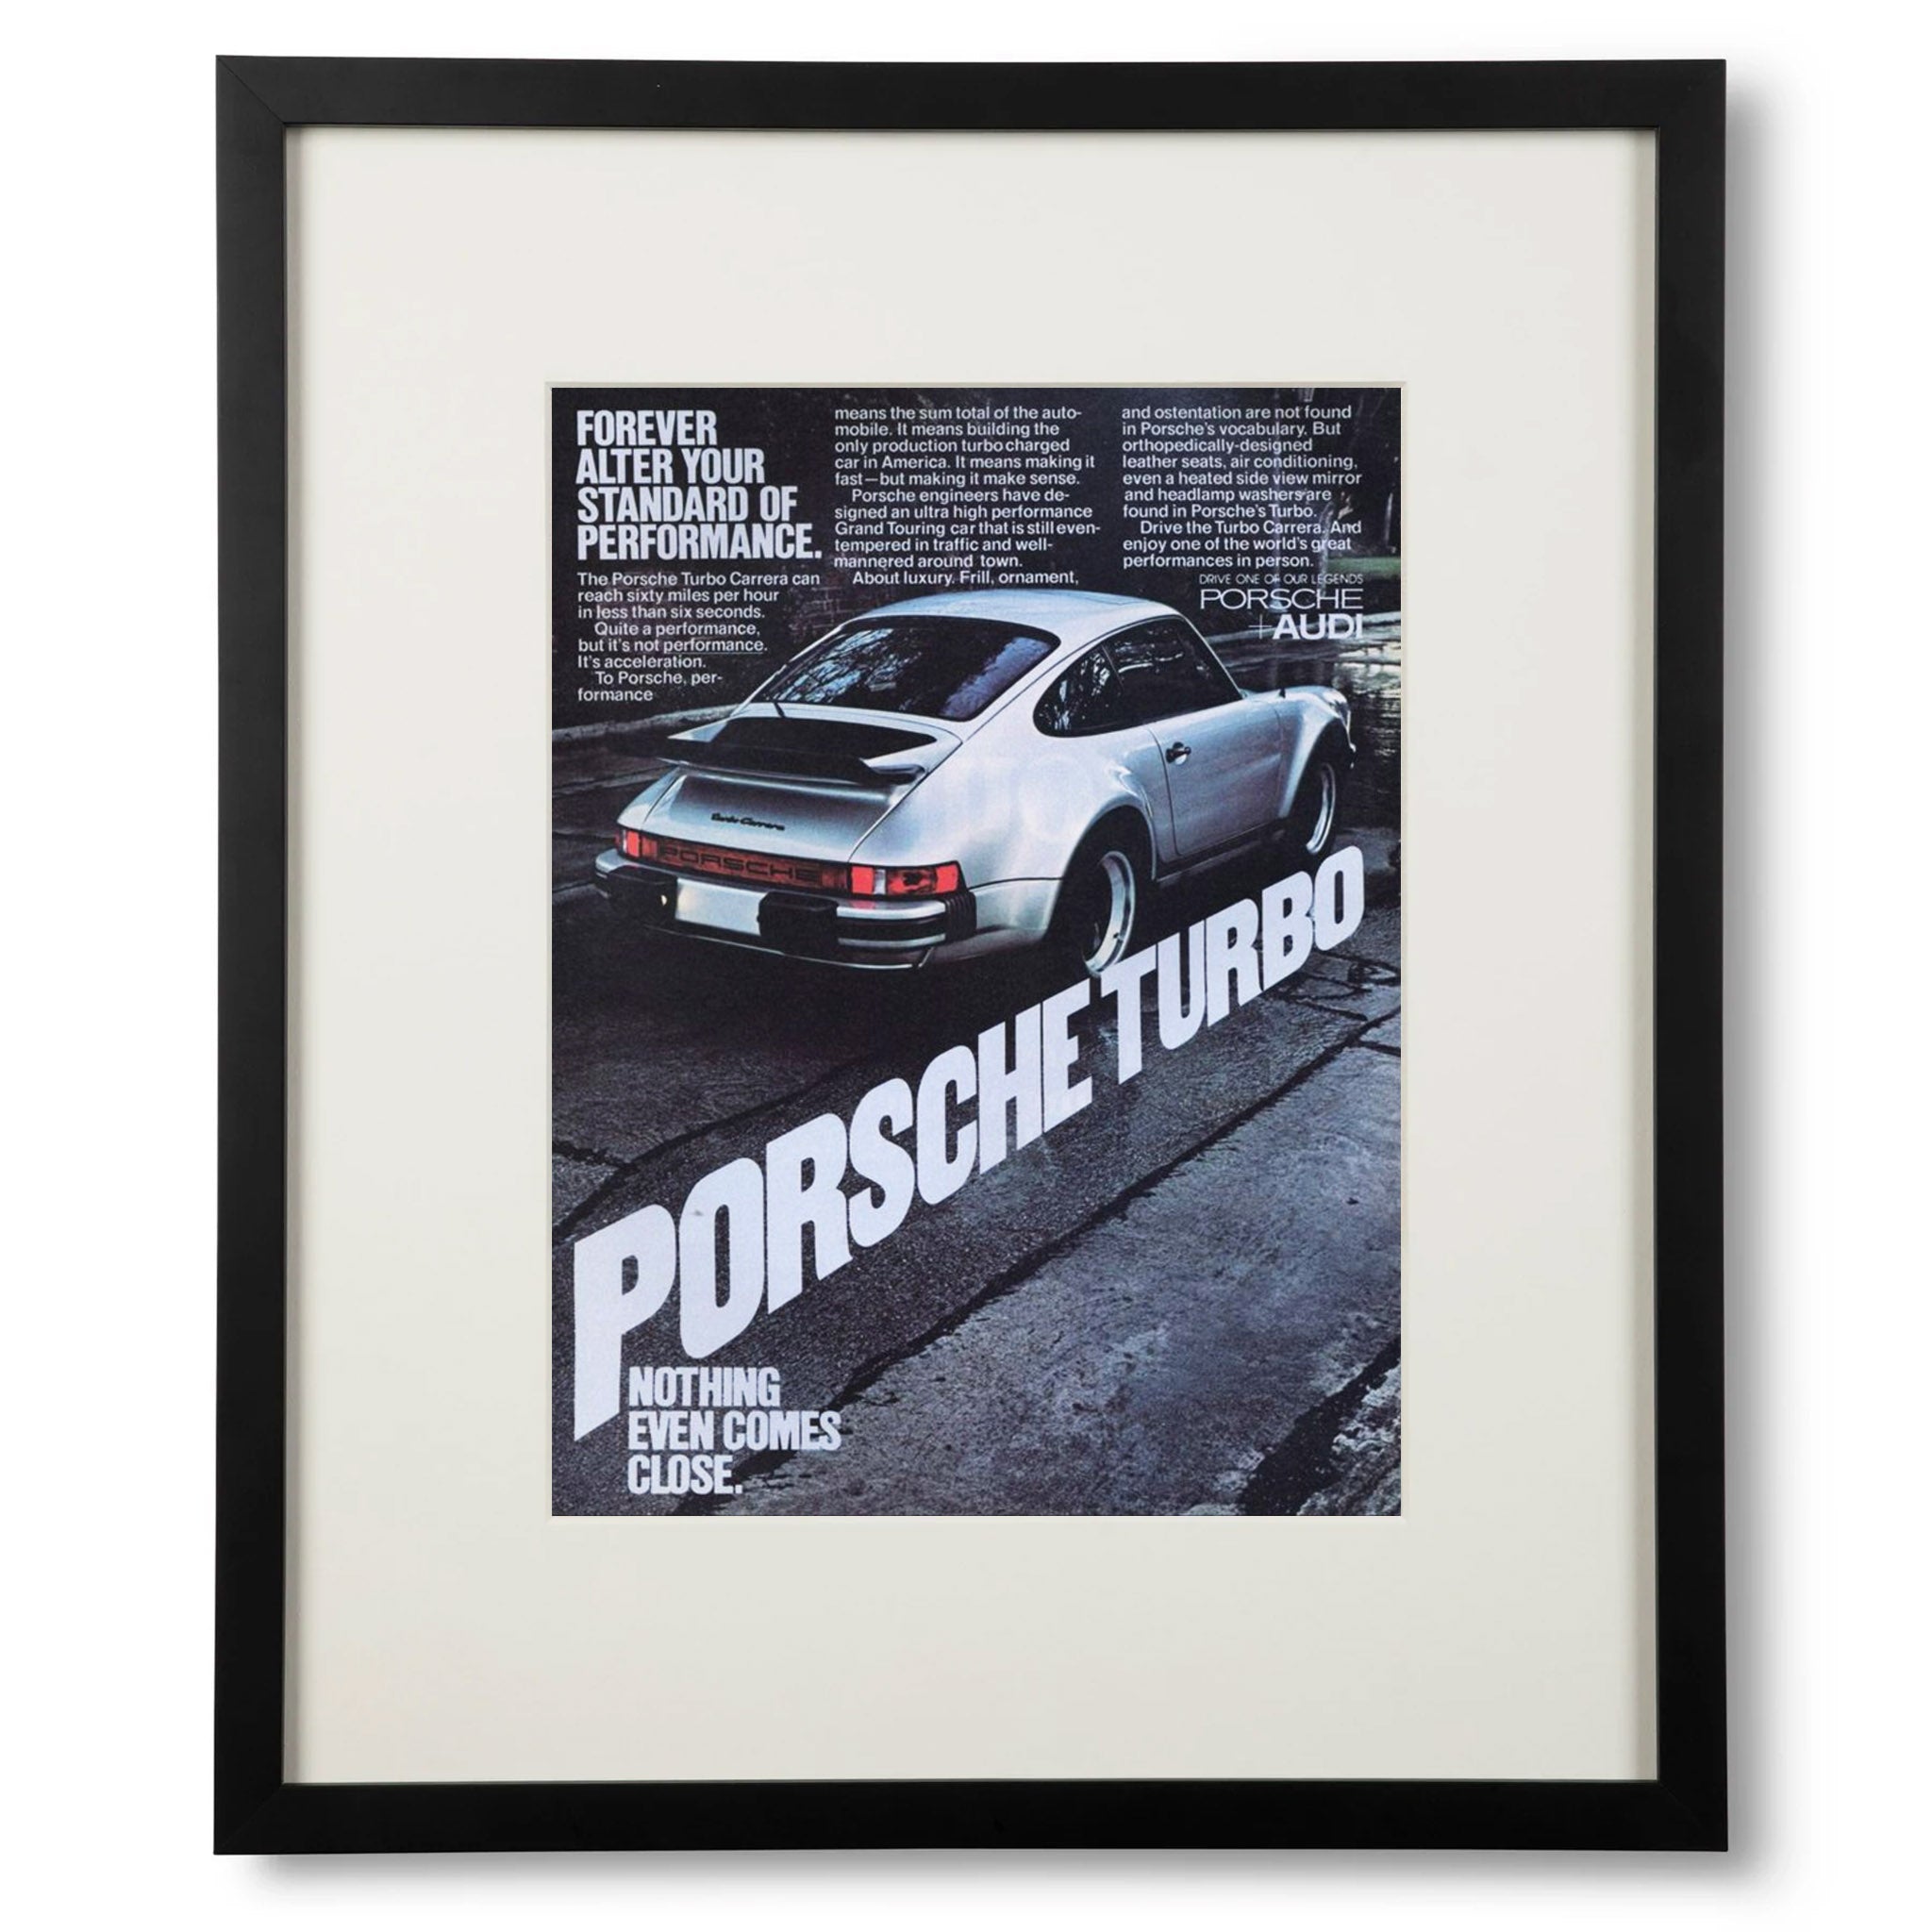 Framed Porsche Turbo Carrera Nothing Comes Close Ad